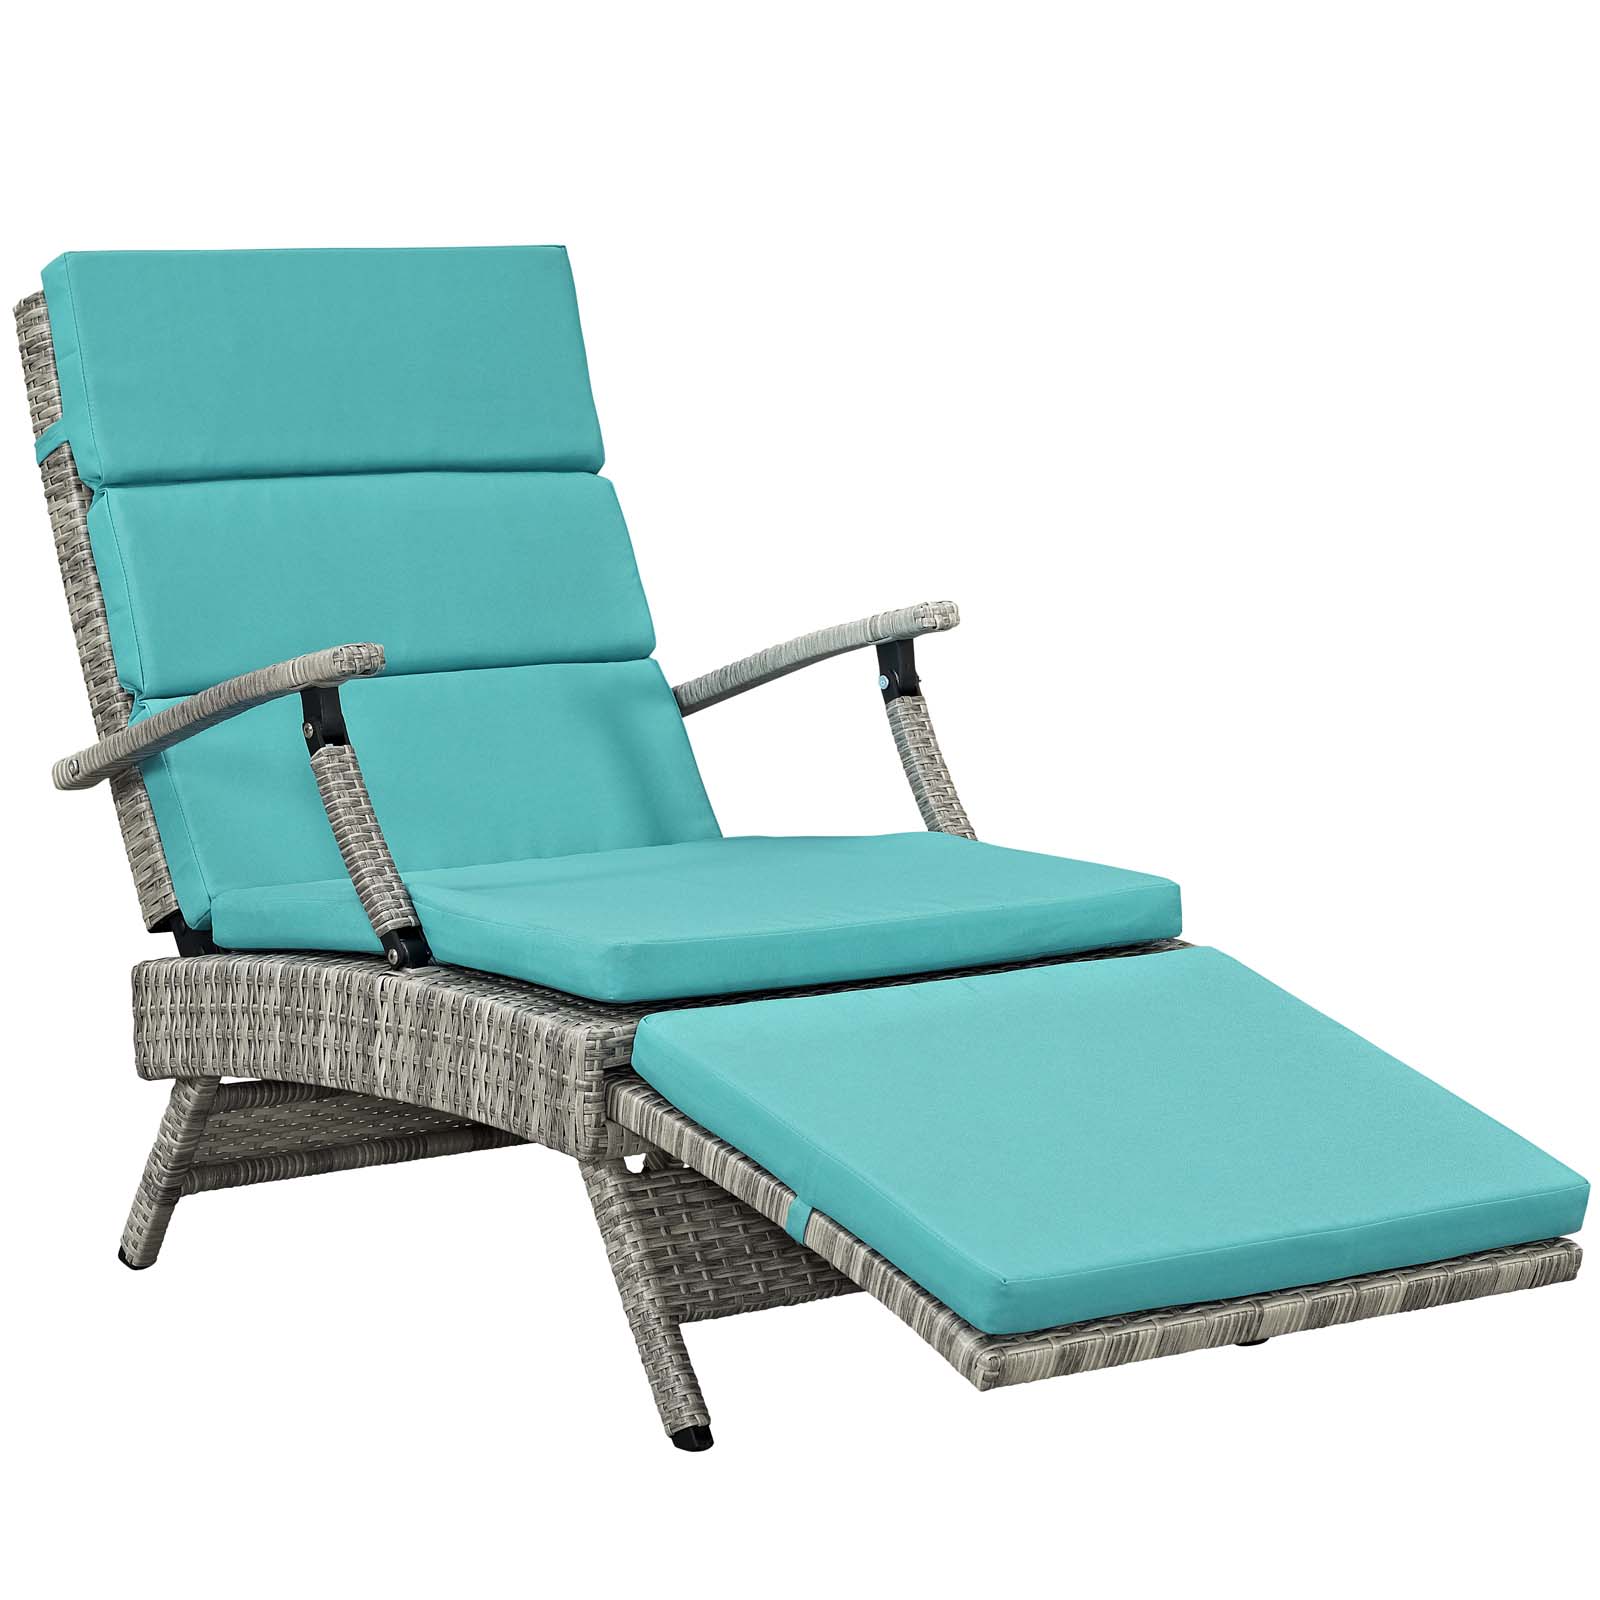 Modway Envisage Chaise Outdoor Patio Wicker Rattan Lounge Chair in Light Gray Turquoise - image 3 of 10